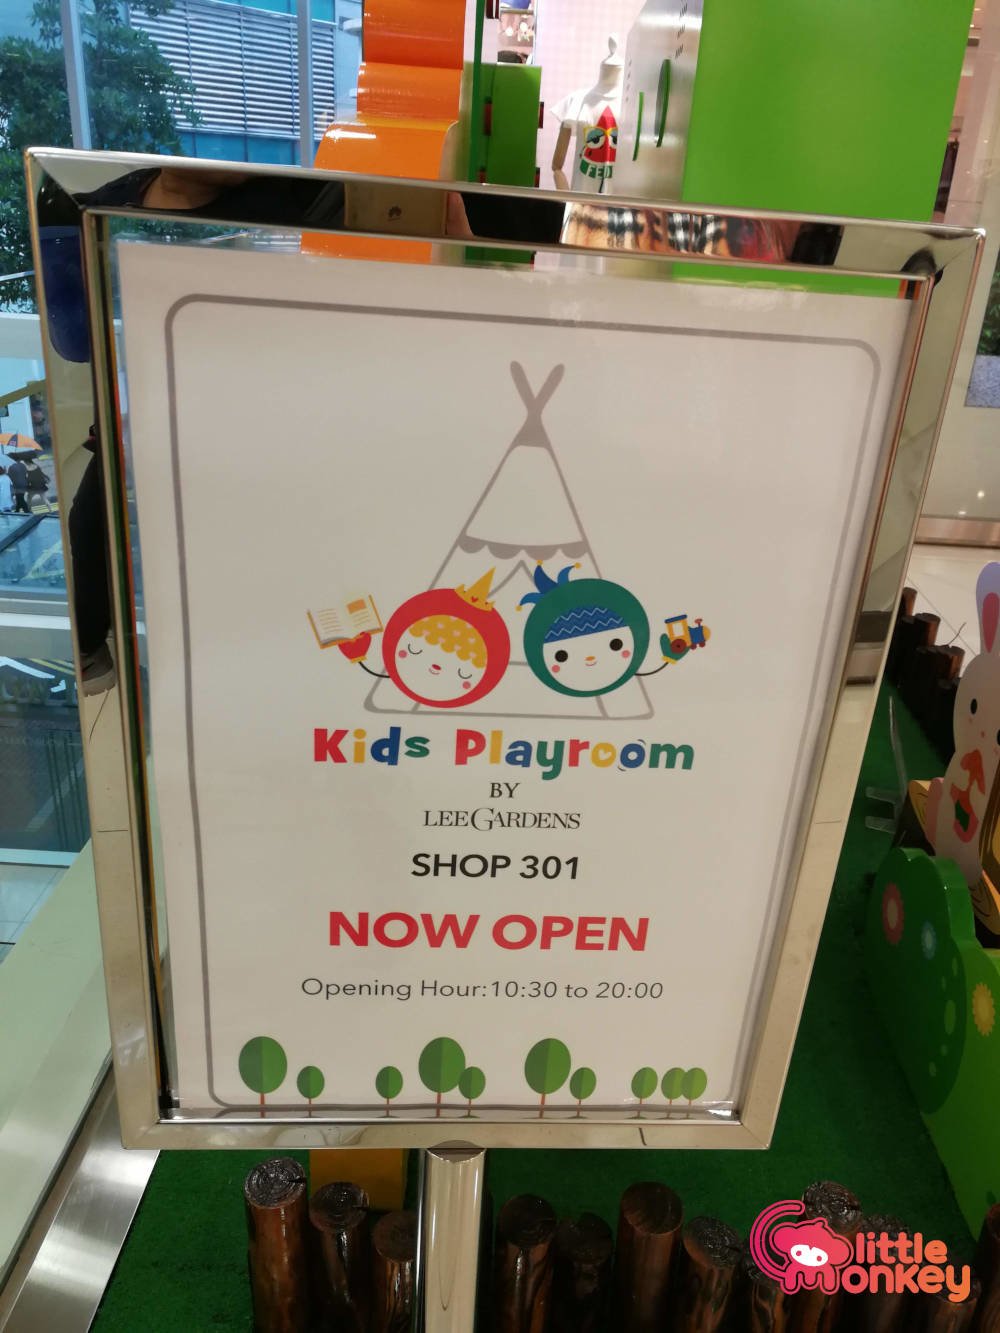 Lee Gardens' kids Playroom in Times Square Shopping Mall